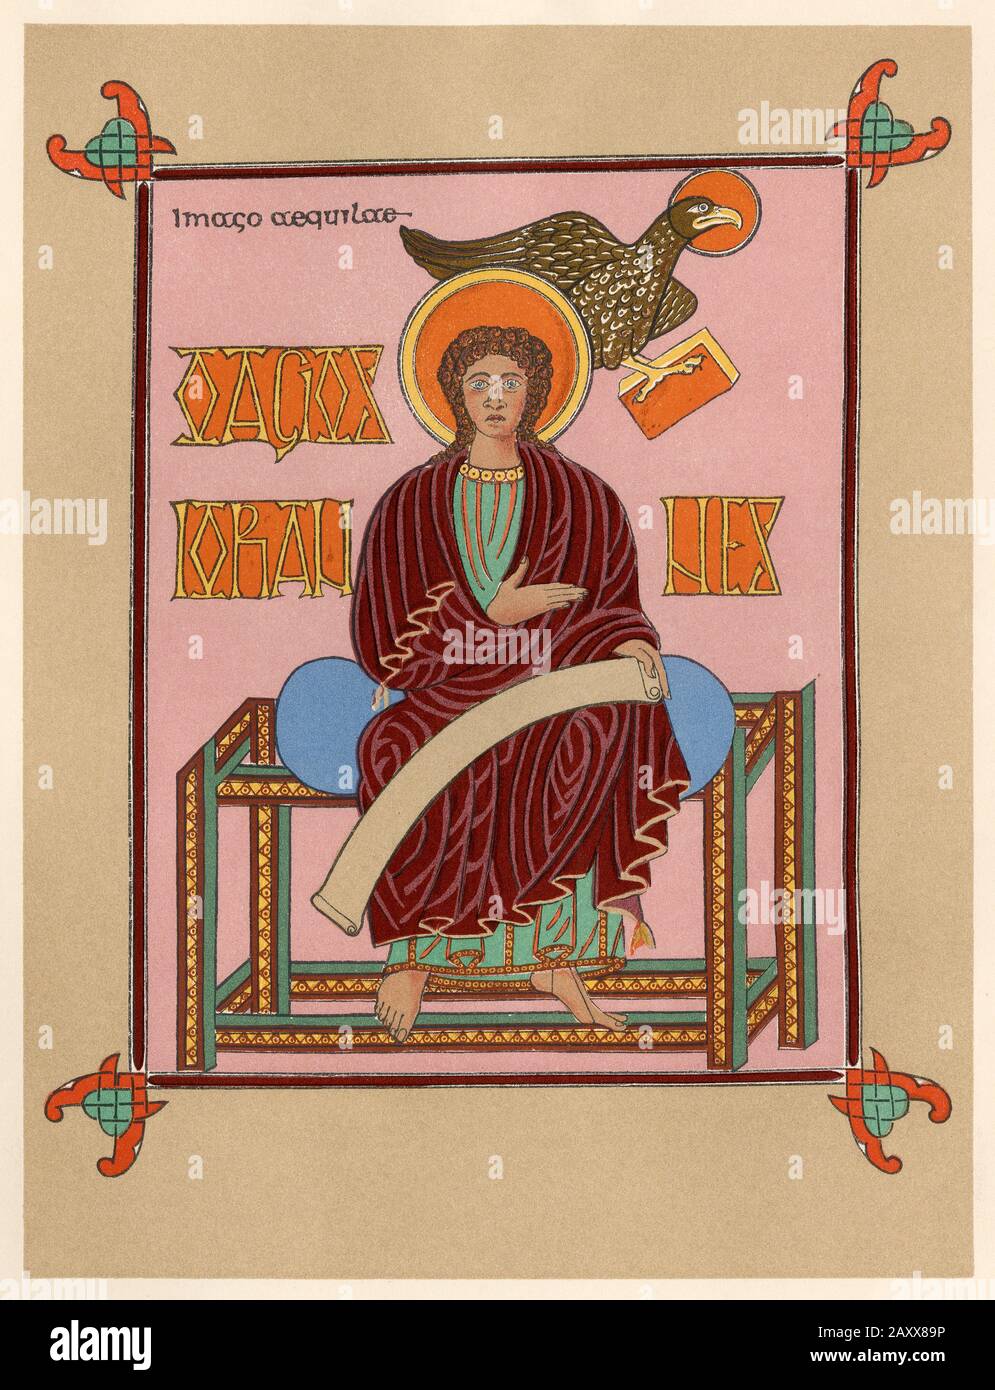 St John the Evangelist, illumination from the Lindisfarne Gospels, 720 AD. Color lithograph reproduction Stock Photo